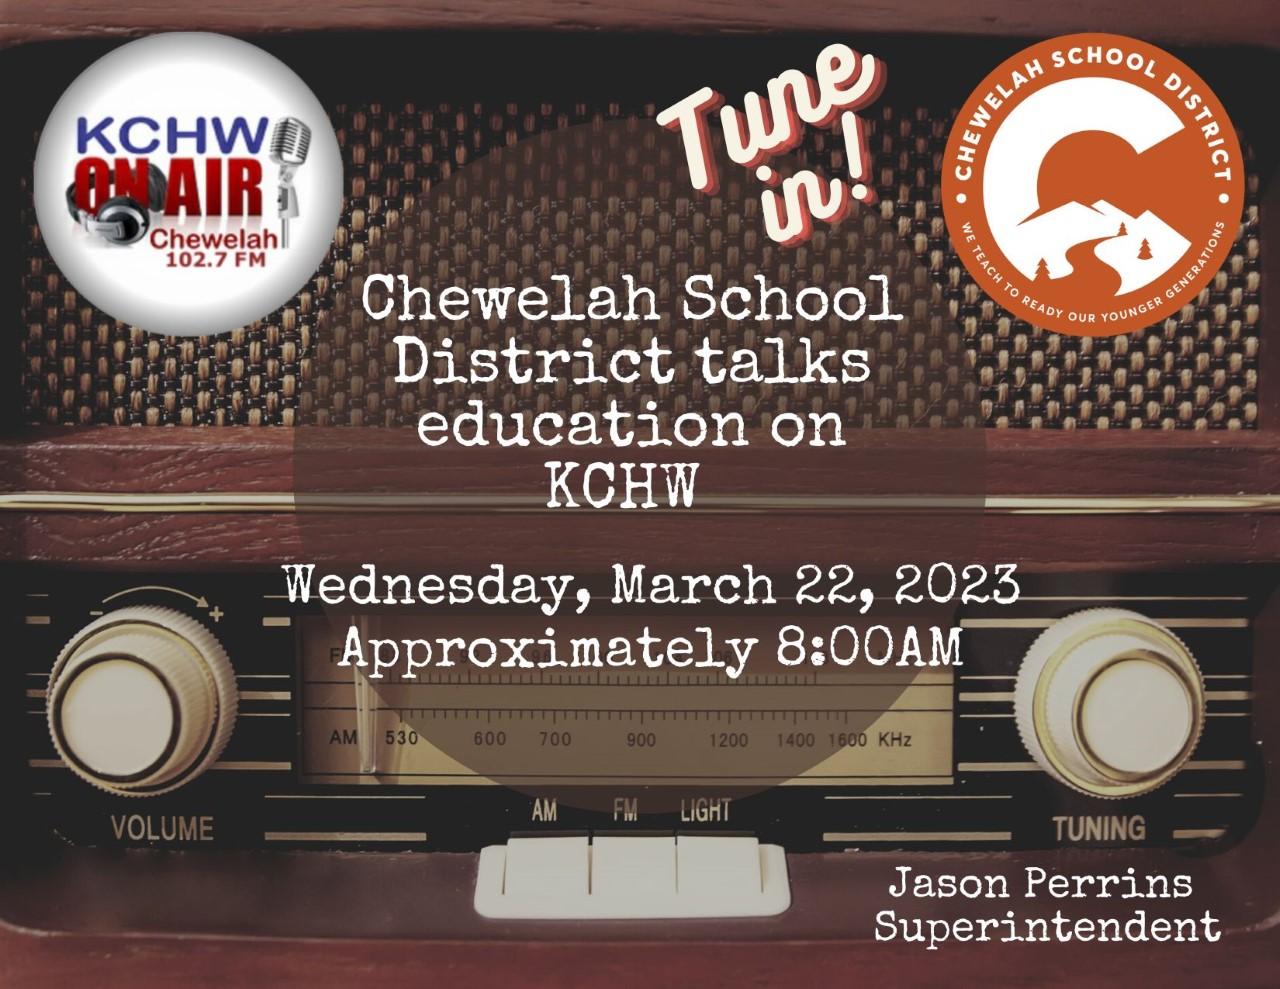 Tune in to KCHW at 102.7fm to hear superintendent Jason Perrins Talk about Chewelah School District.  Wednesday, March 22, 2023 at ~8:00am